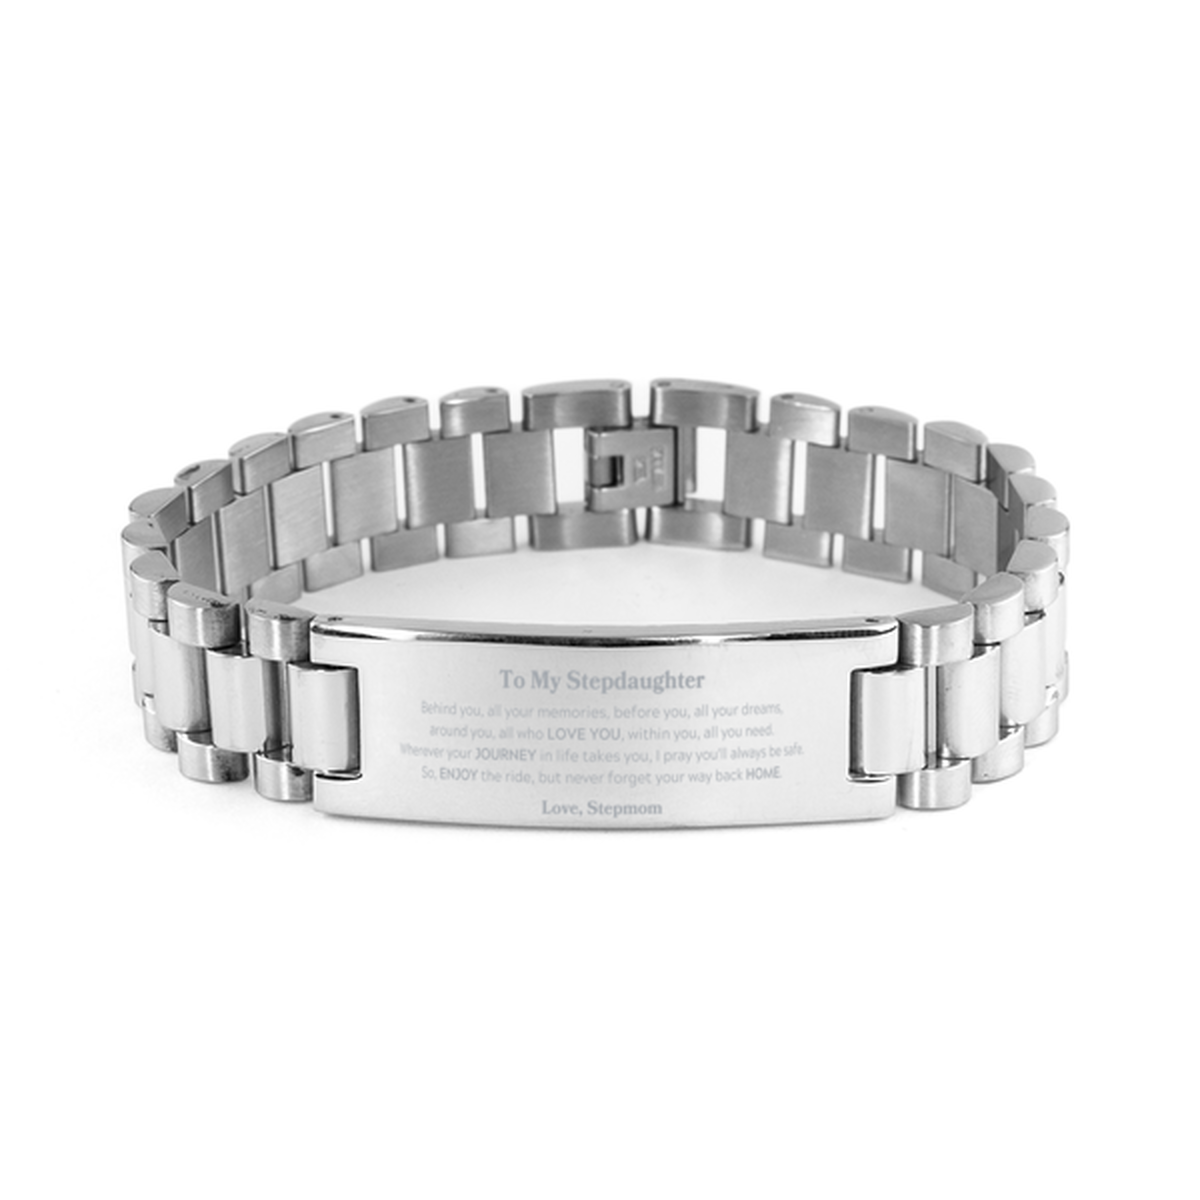 To My Stepdaughter Graduation Gifts from Stepmom, Stepdaughter Ladder Stainless Steel Bracelet Christmas Birthday Gifts for Stepdaughter Behind you, all your memories, before you, all your dreams. Love, Stepmom